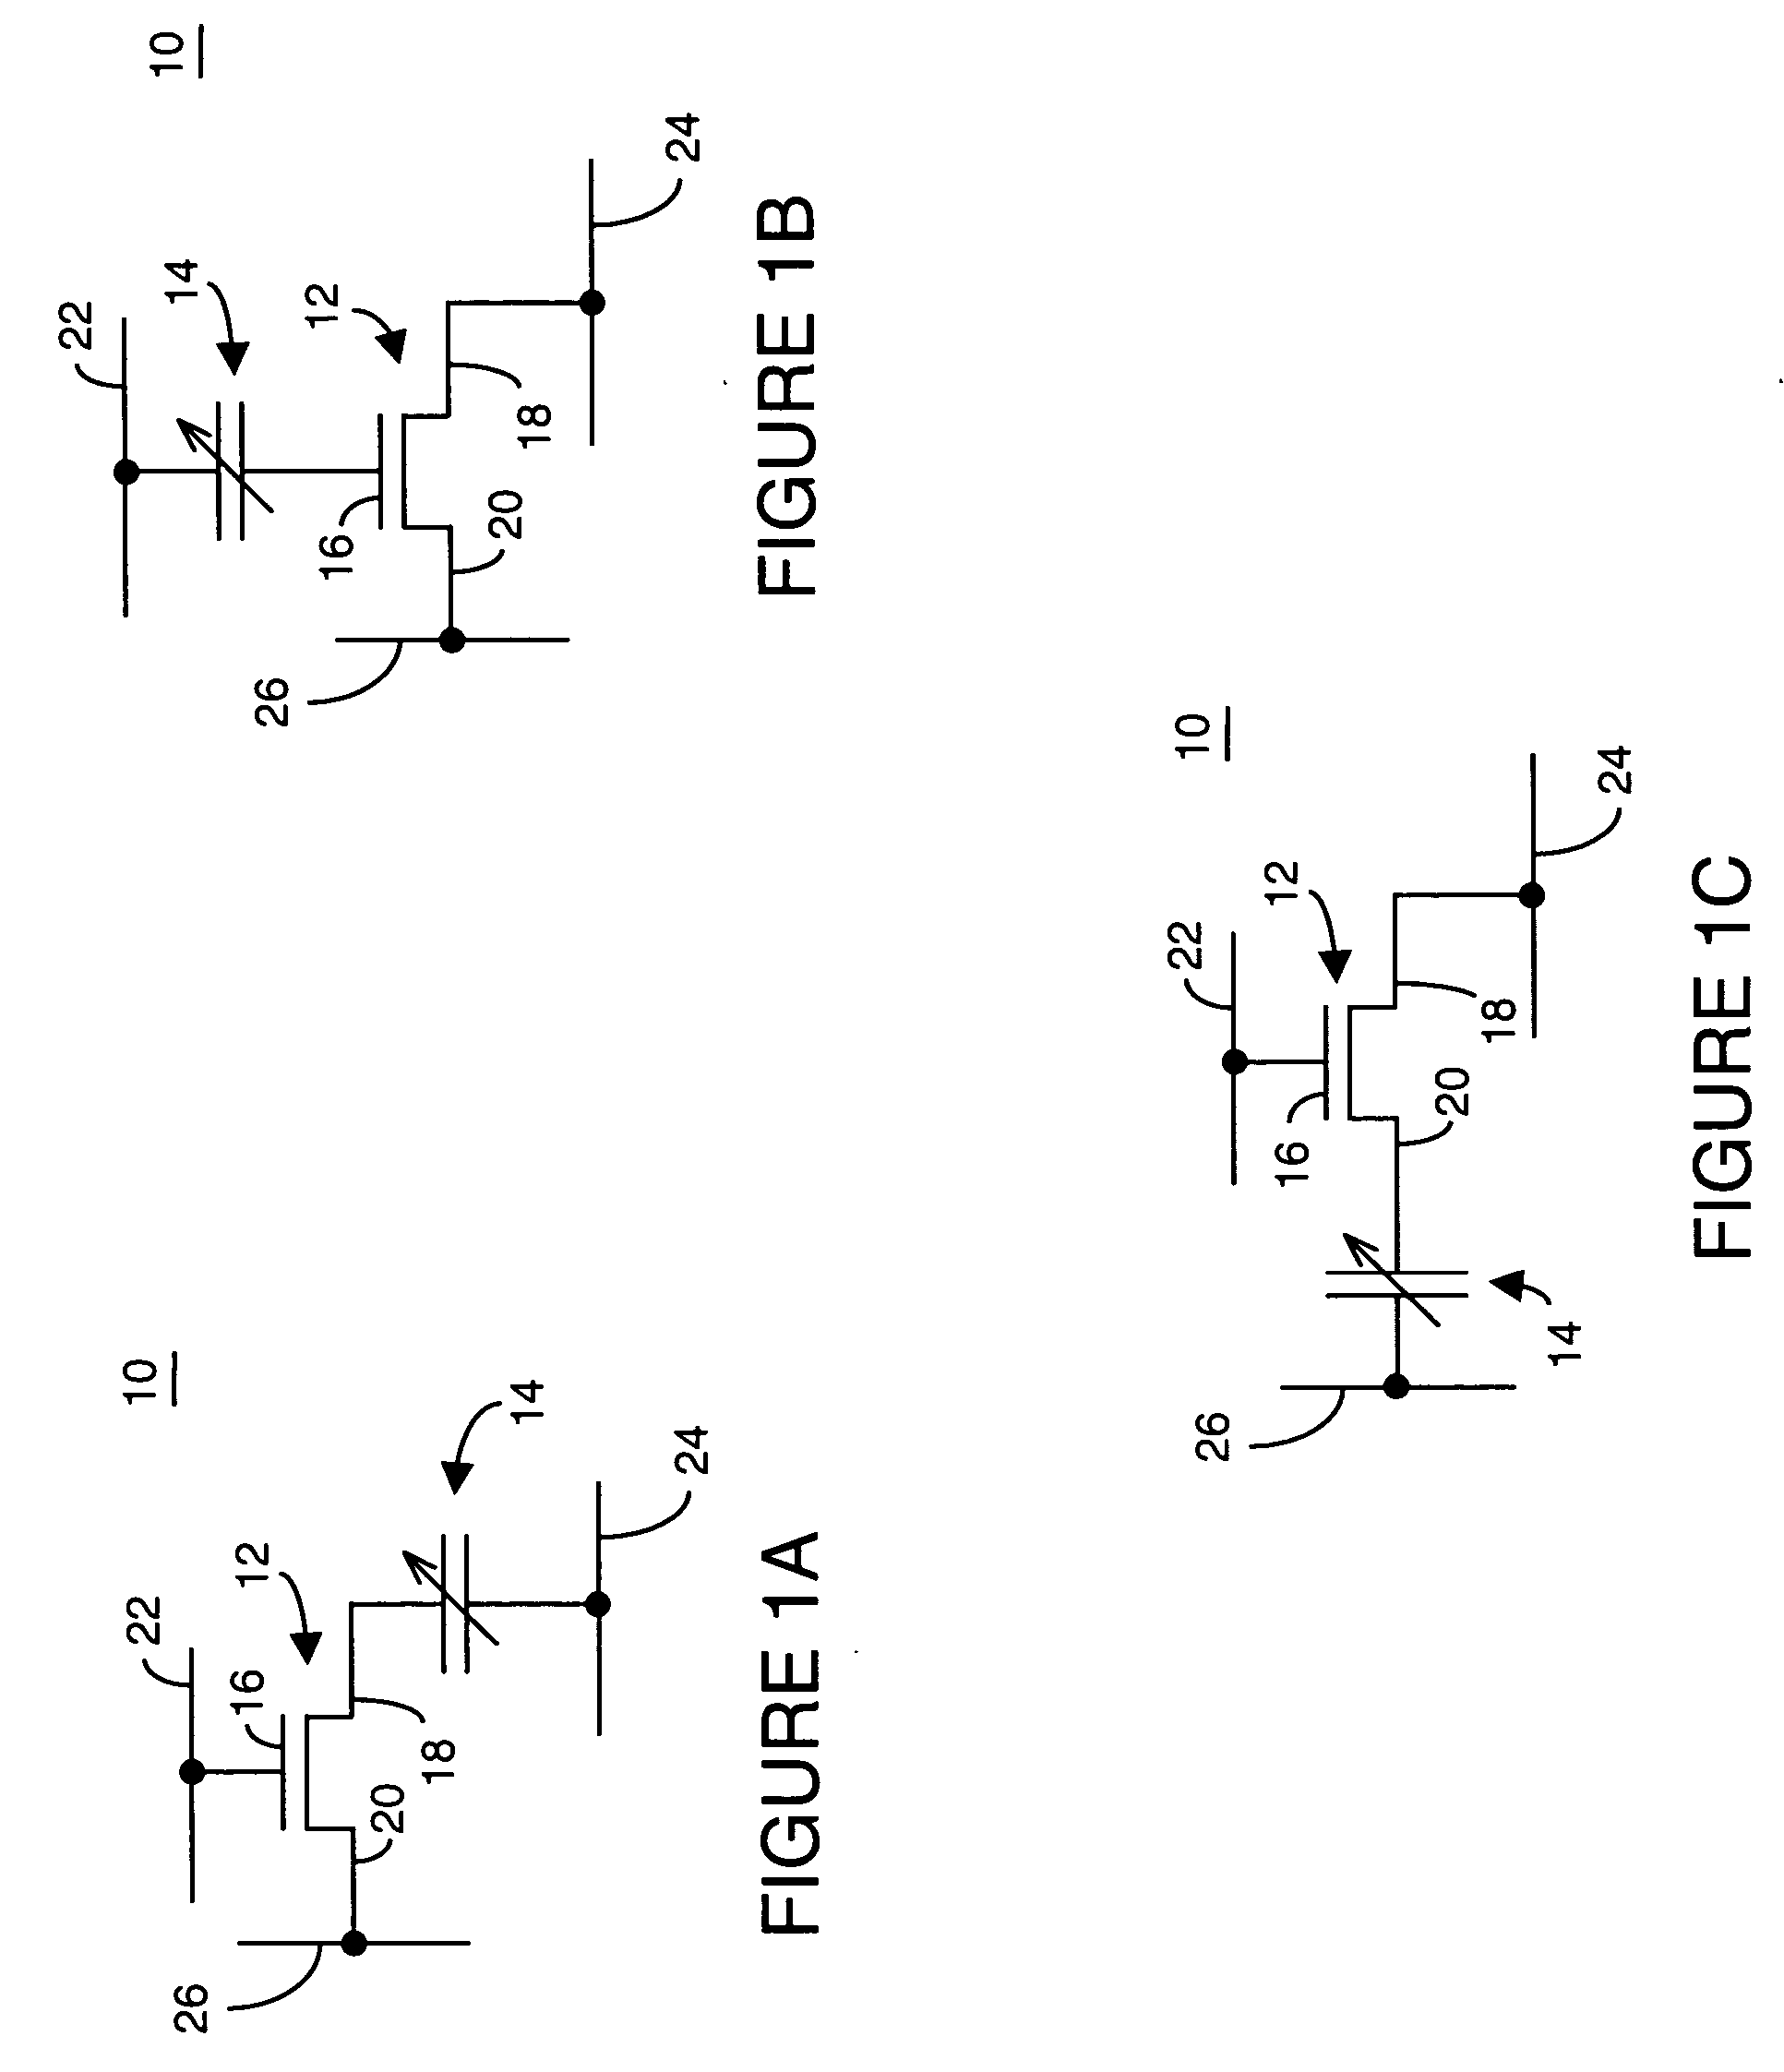 Memory cell having an electric field programmable storage element, and method of operating same